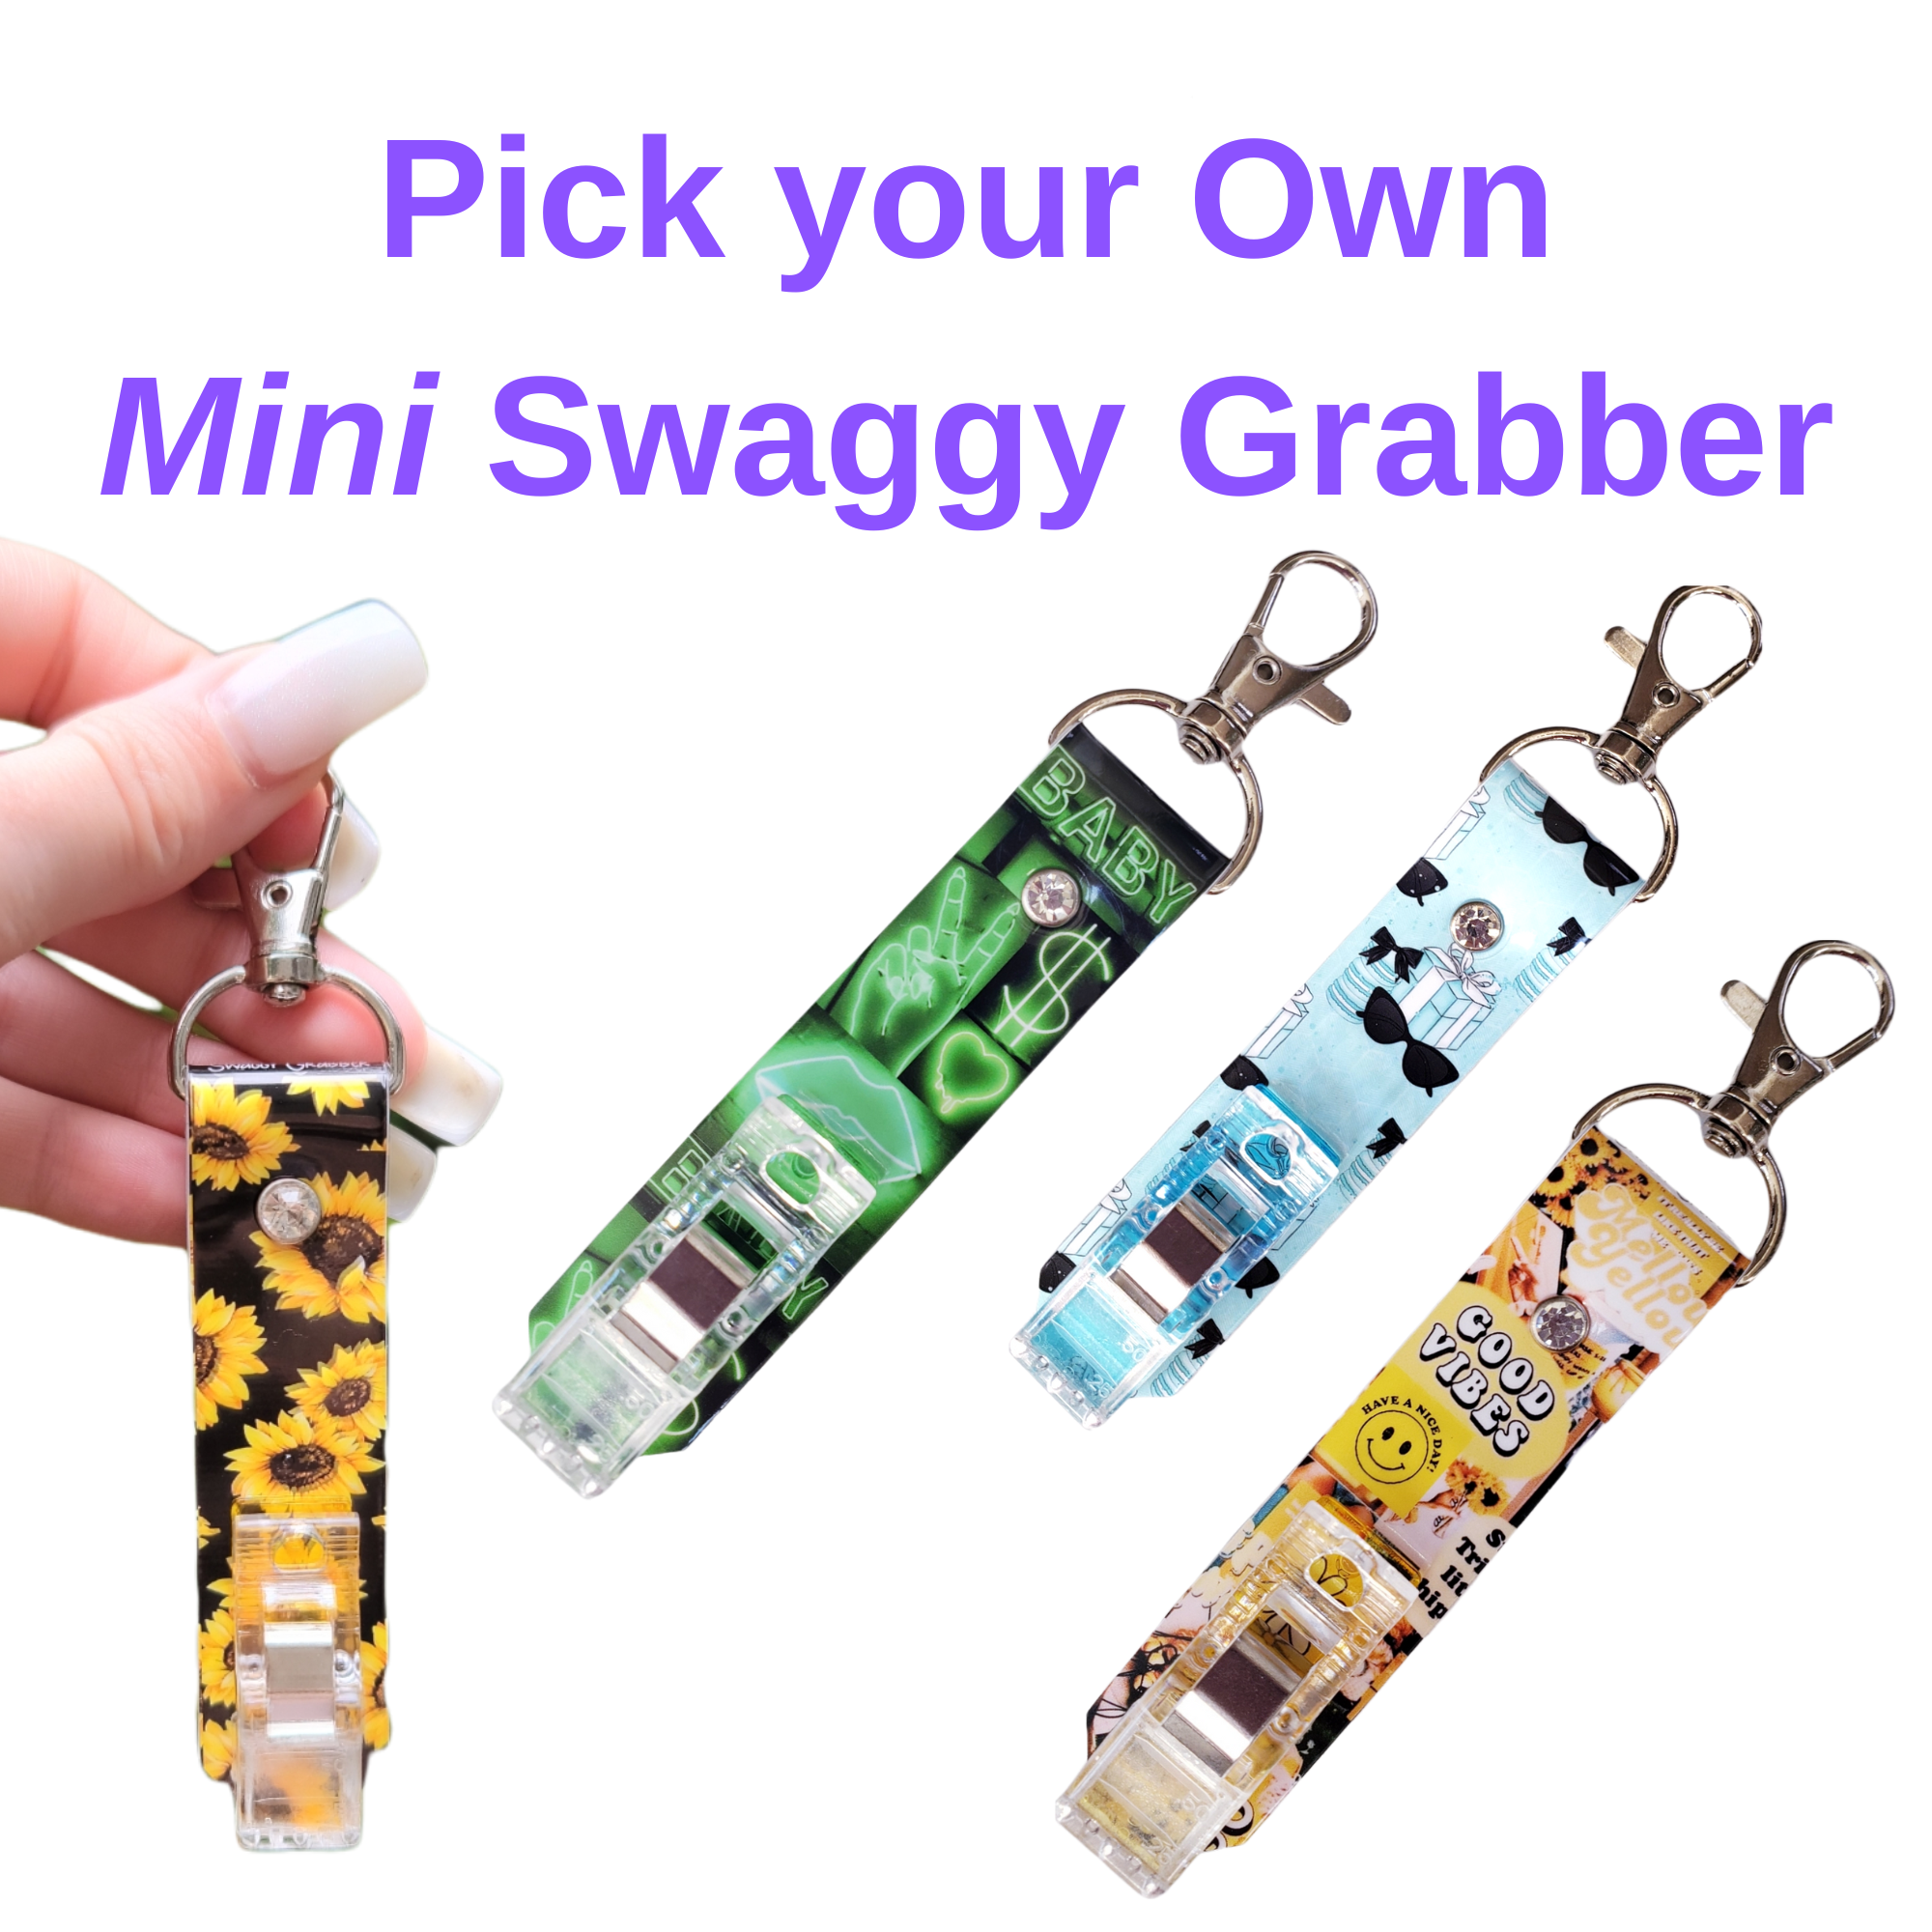 NEW! 5 in 1 Tool- Bracelet & Necklace Clasp Holder, Earring Back